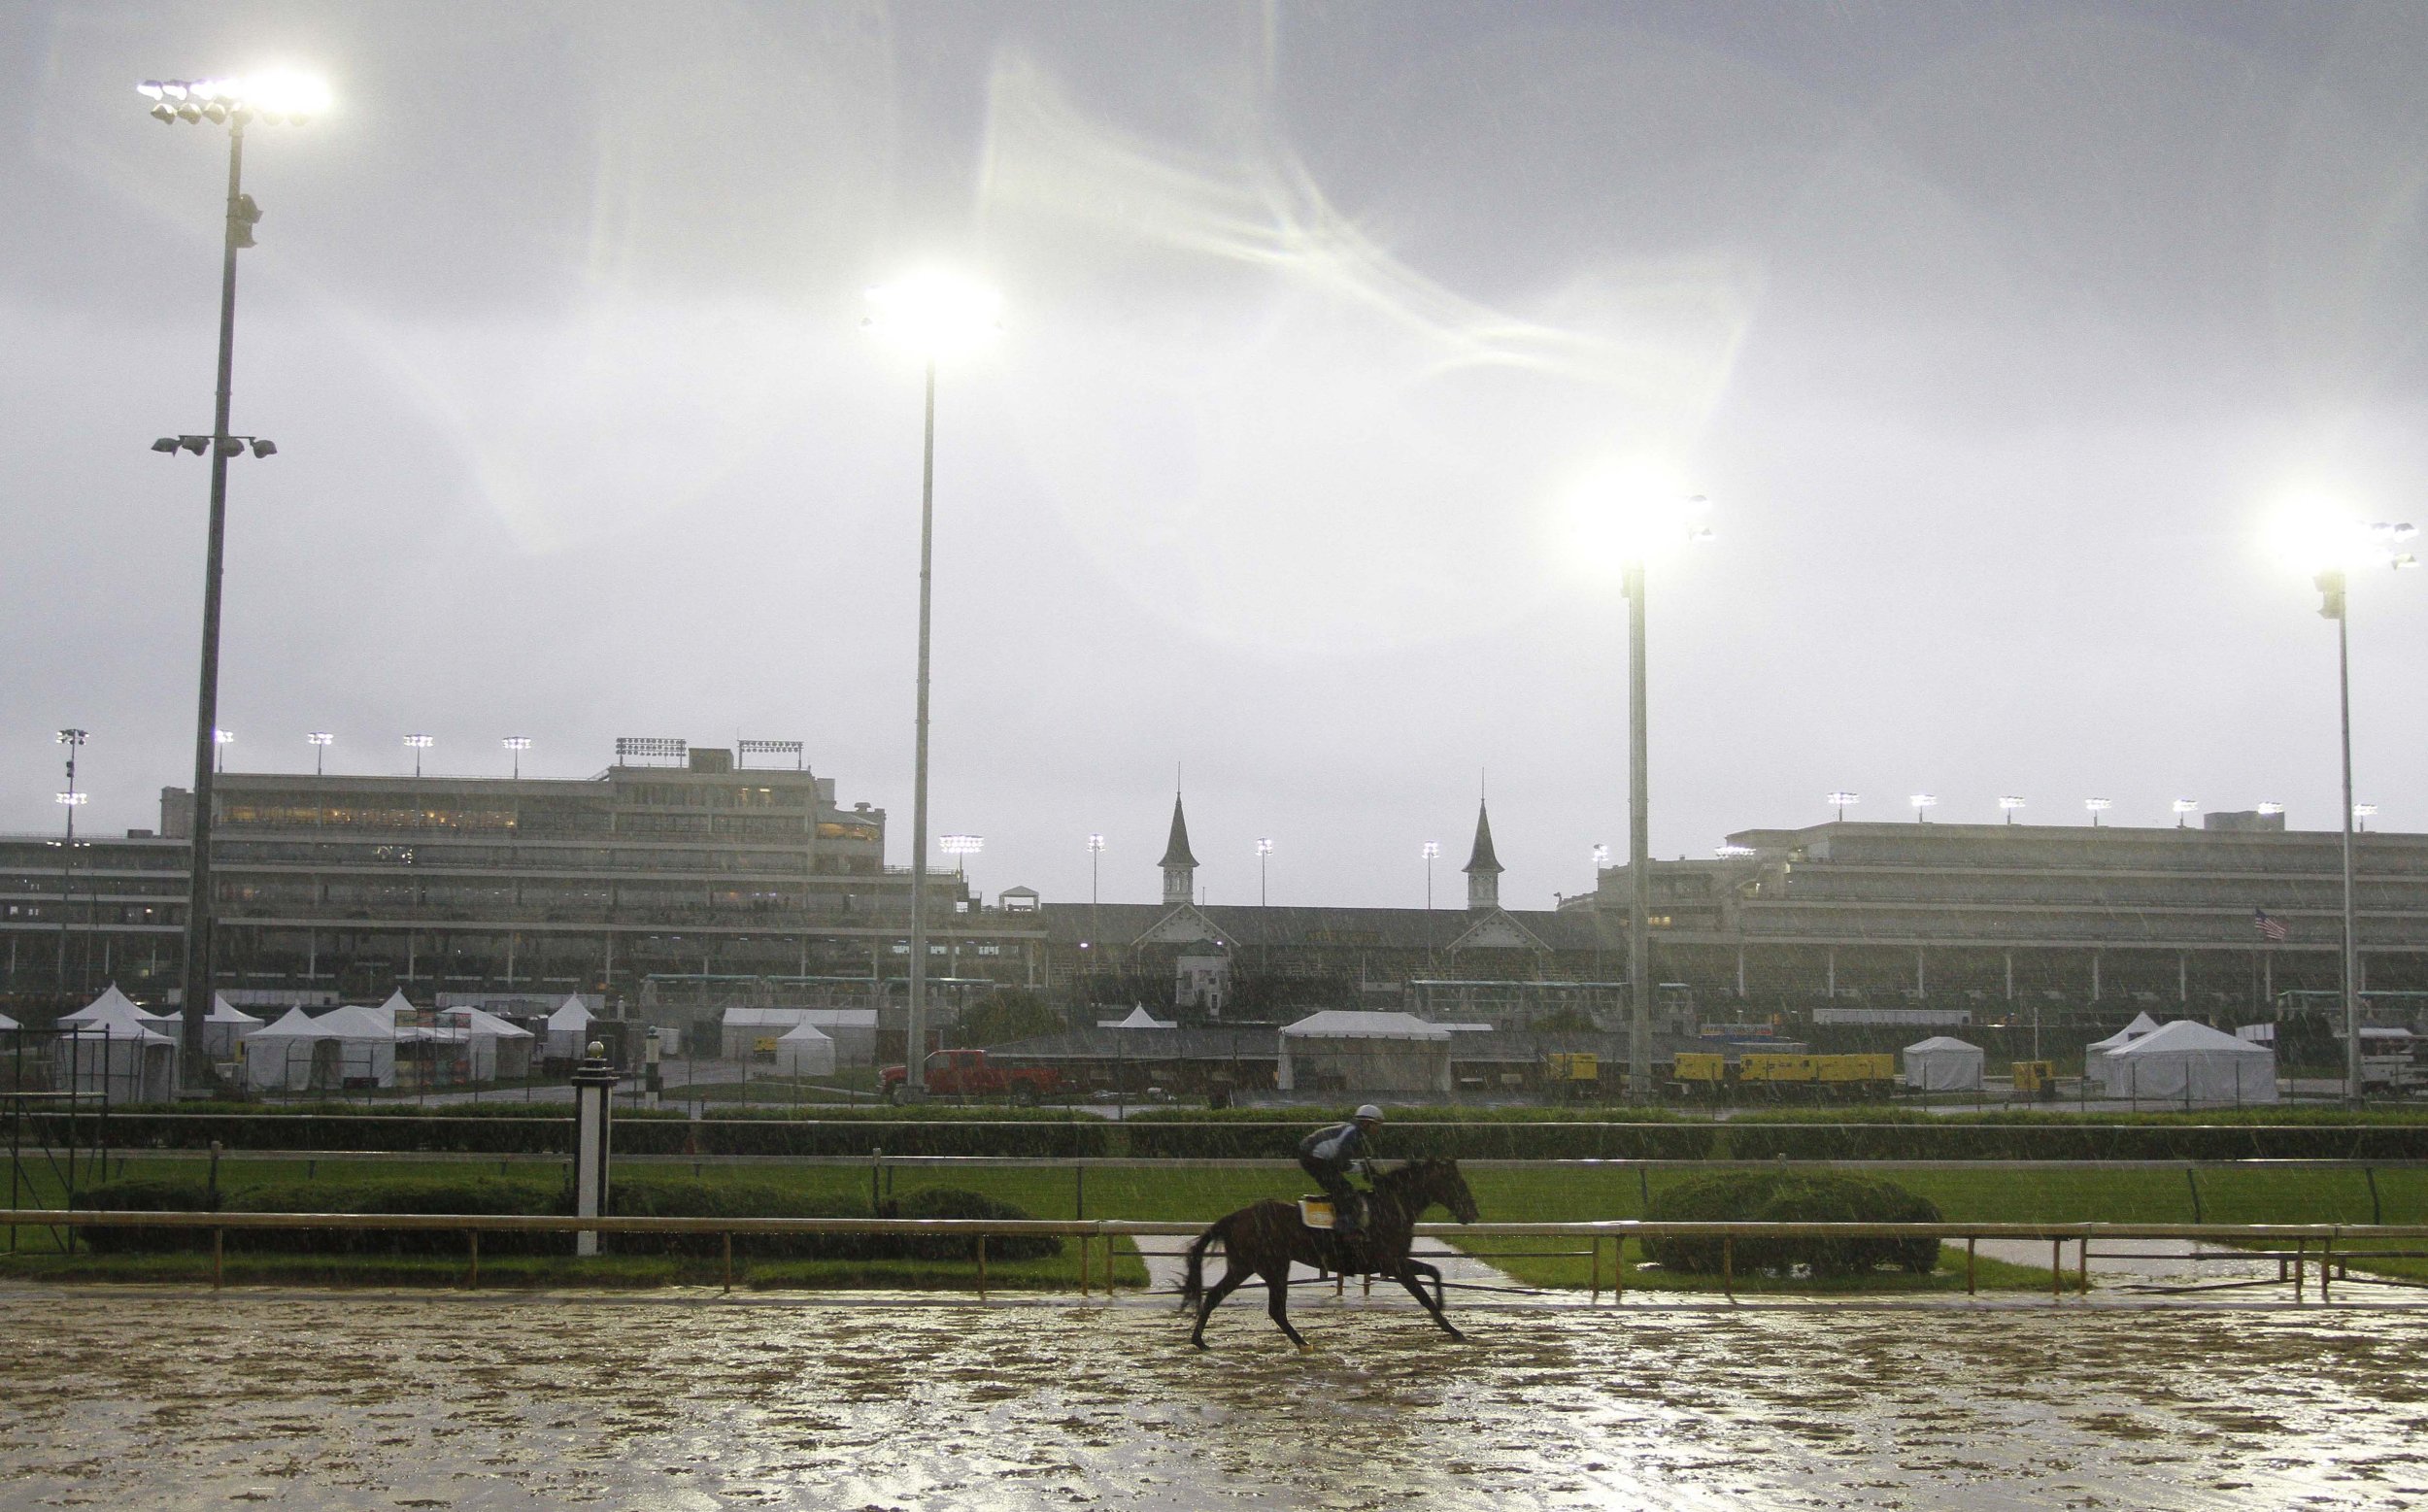 Kentucky Derby 2014 Weather Conditions, Post Time And Positions IBTimes